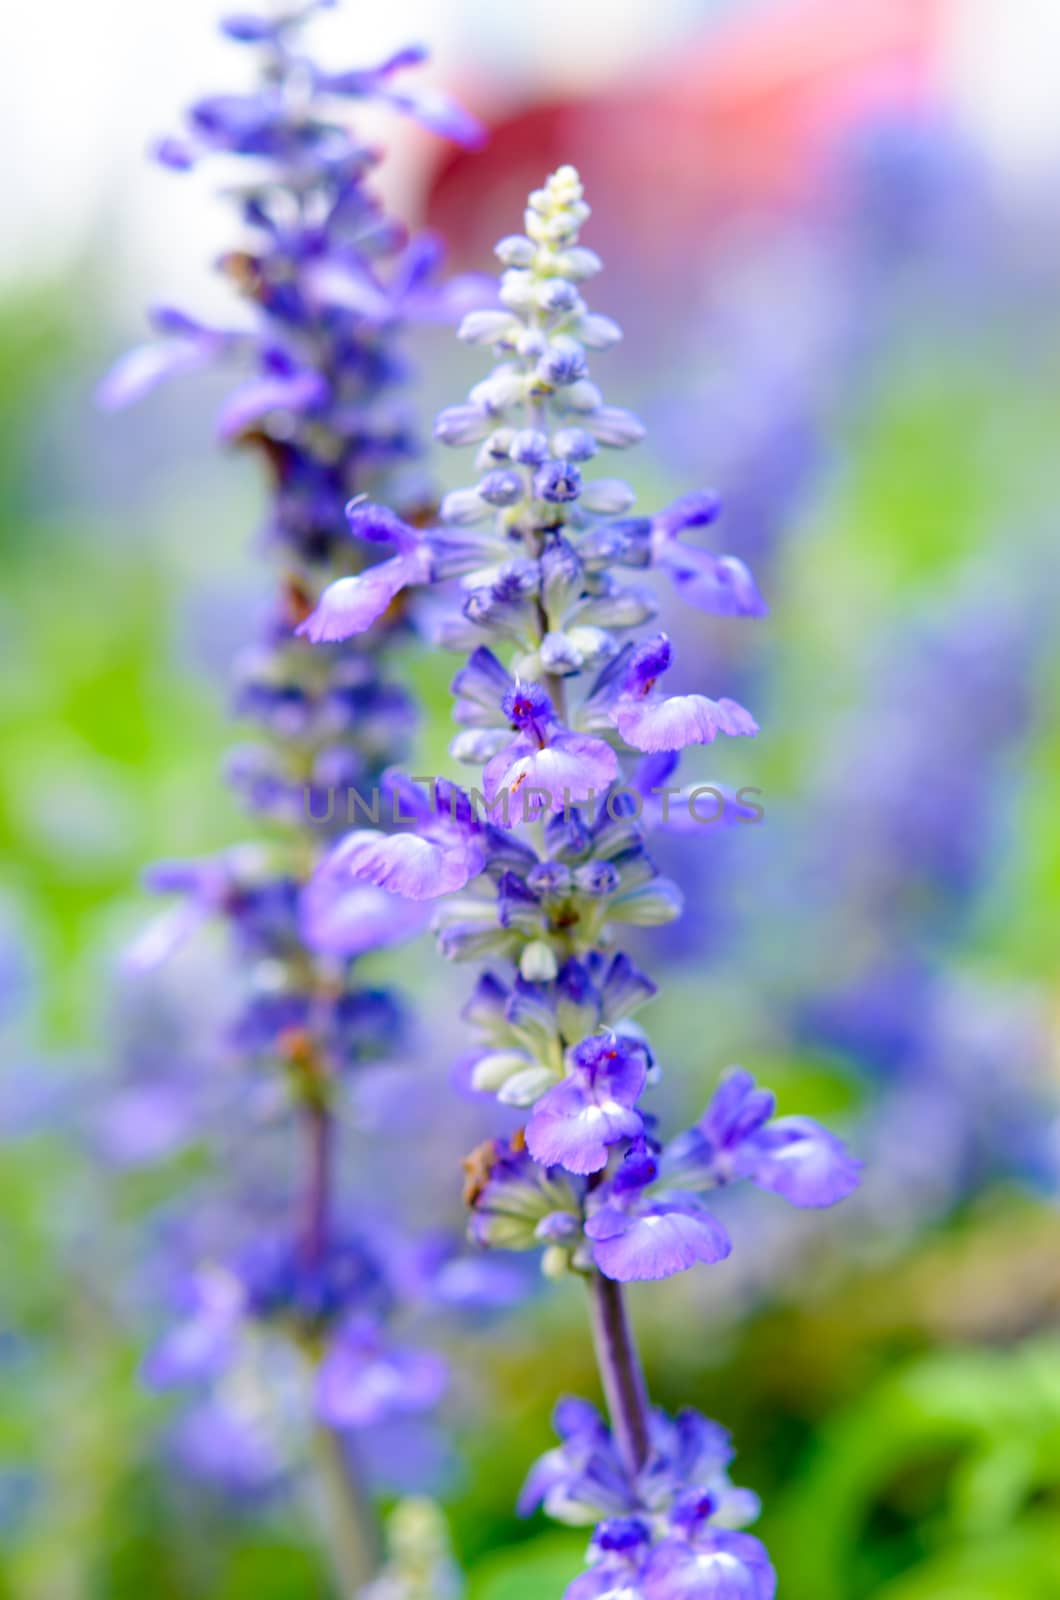 Blooming Salvia flowers by aoo3771